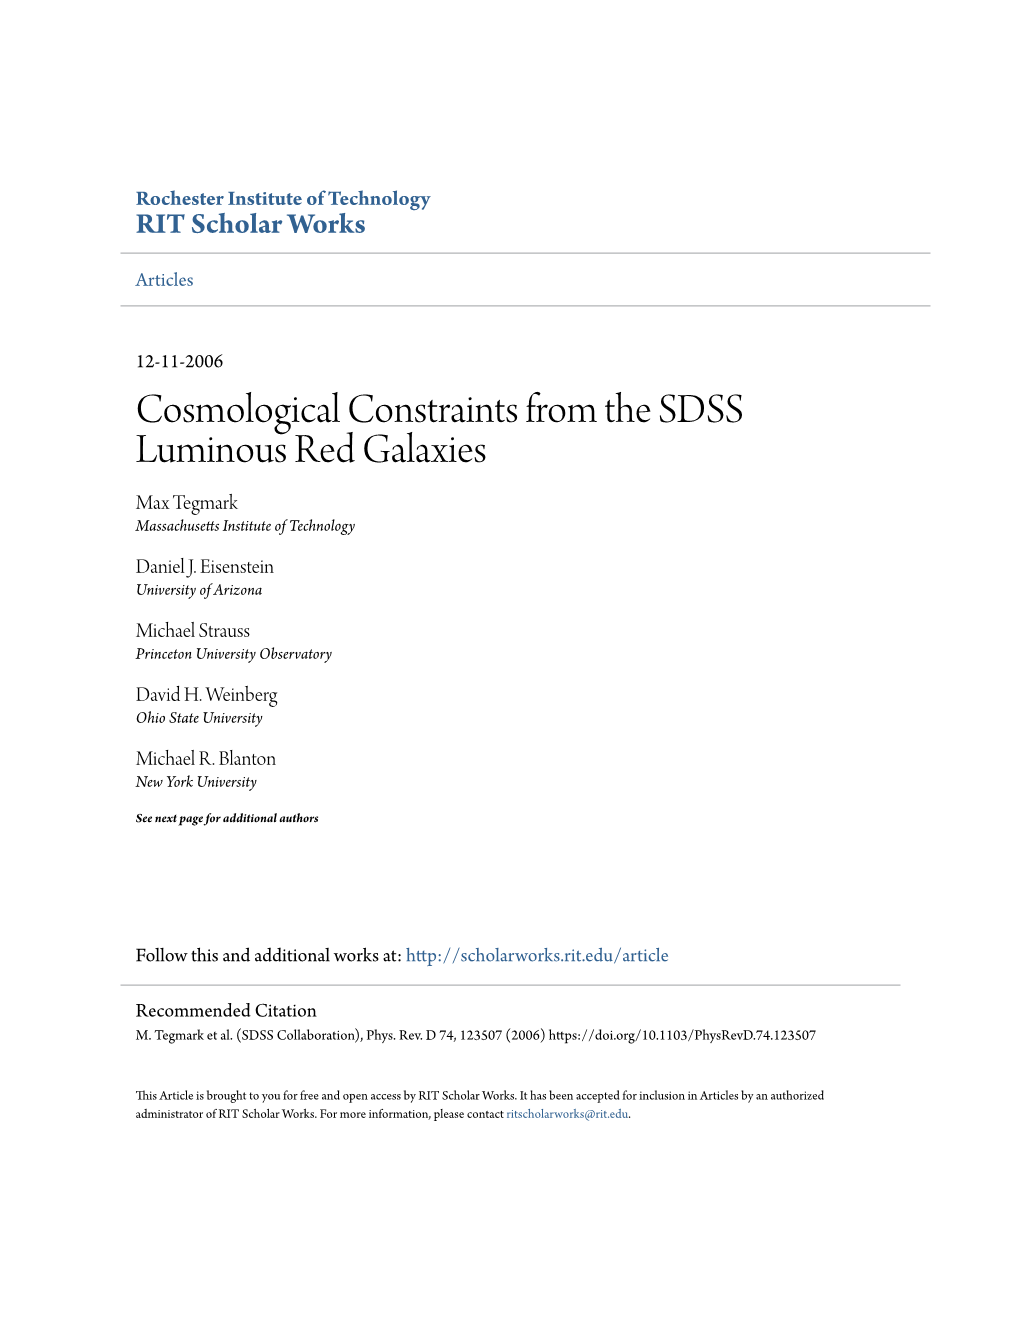 Cosmological Constraints from the SDSS Luminous Red Galaxies Max Tegmark Massachusetts Ni Stitute of Technology